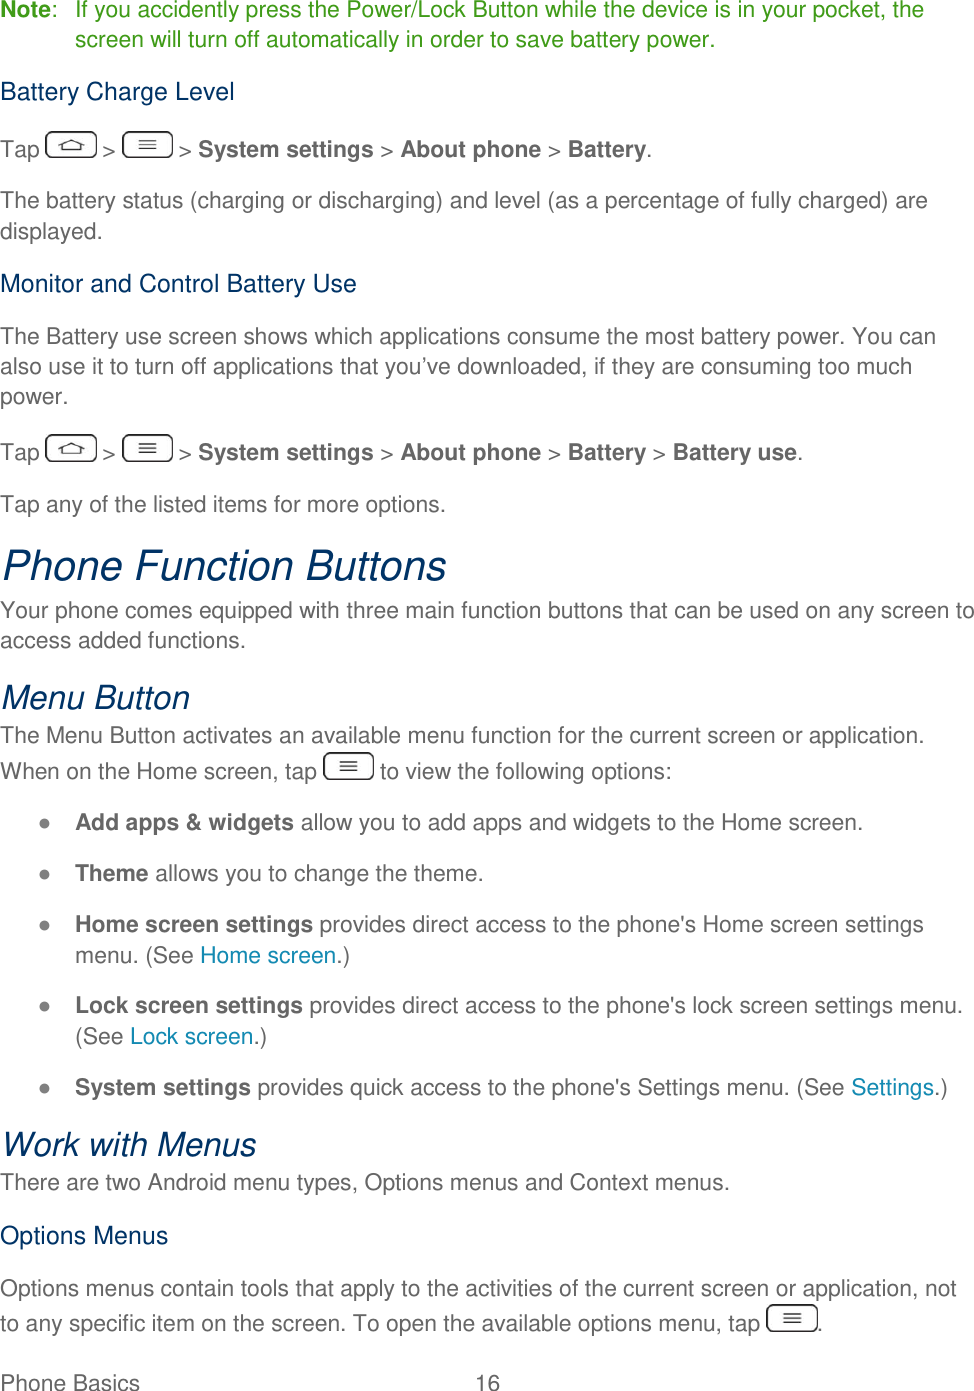  Phone Basics  16   Note:   If you accidently press the Power/Lock Button while the device is in your pocket, the screen will turn off automatically in order to save battery power. Battery Charge Level Tap   &gt;   &gt; System settings &gt; About phone &gt; Battery. The battery status (charging or discharging) and level (as a percentage of fully charged) are displayed. Monitor and Control Battery Use The Battery use screen shows which applications consume the most battery power. You can also use it to turn off applications that you‘ve downloaded, if they are consuming too much power. Tap   &gt;   &gt; System settings &gt; About phone &gt; Battery &gt; Battery use. Tap any of the listed items for more options. Phone Function Buttons Your phone comes equipped with three main function buttons that can be used on any screen to access added functions. Menu Button The Menu Button activates an available menu function for the current screen or application. When on the Home screen, tap   to view the following options: ● Add apps &amp; widgets allow you to add apps and widgets to the Home screen. ● Theme allows you to change the theme. ● Home screen settings provides direct access to the phone&apos;s Home screen settings menu. (See Home screen.) ● Lock screen settings provides direct access to the phone&apos;s lock screen settings menu. (See Lock screen.) ● System settings provides quick access to the phone&apos;s Settings menu. (See Settings.) Work with Menus There are two Android menu types, Options menus and Context menus. Options Menus Options menus contain tools that apply to the activities of the current screen or application, not to any specific item on the screen. To open the available options menu, tap  . 